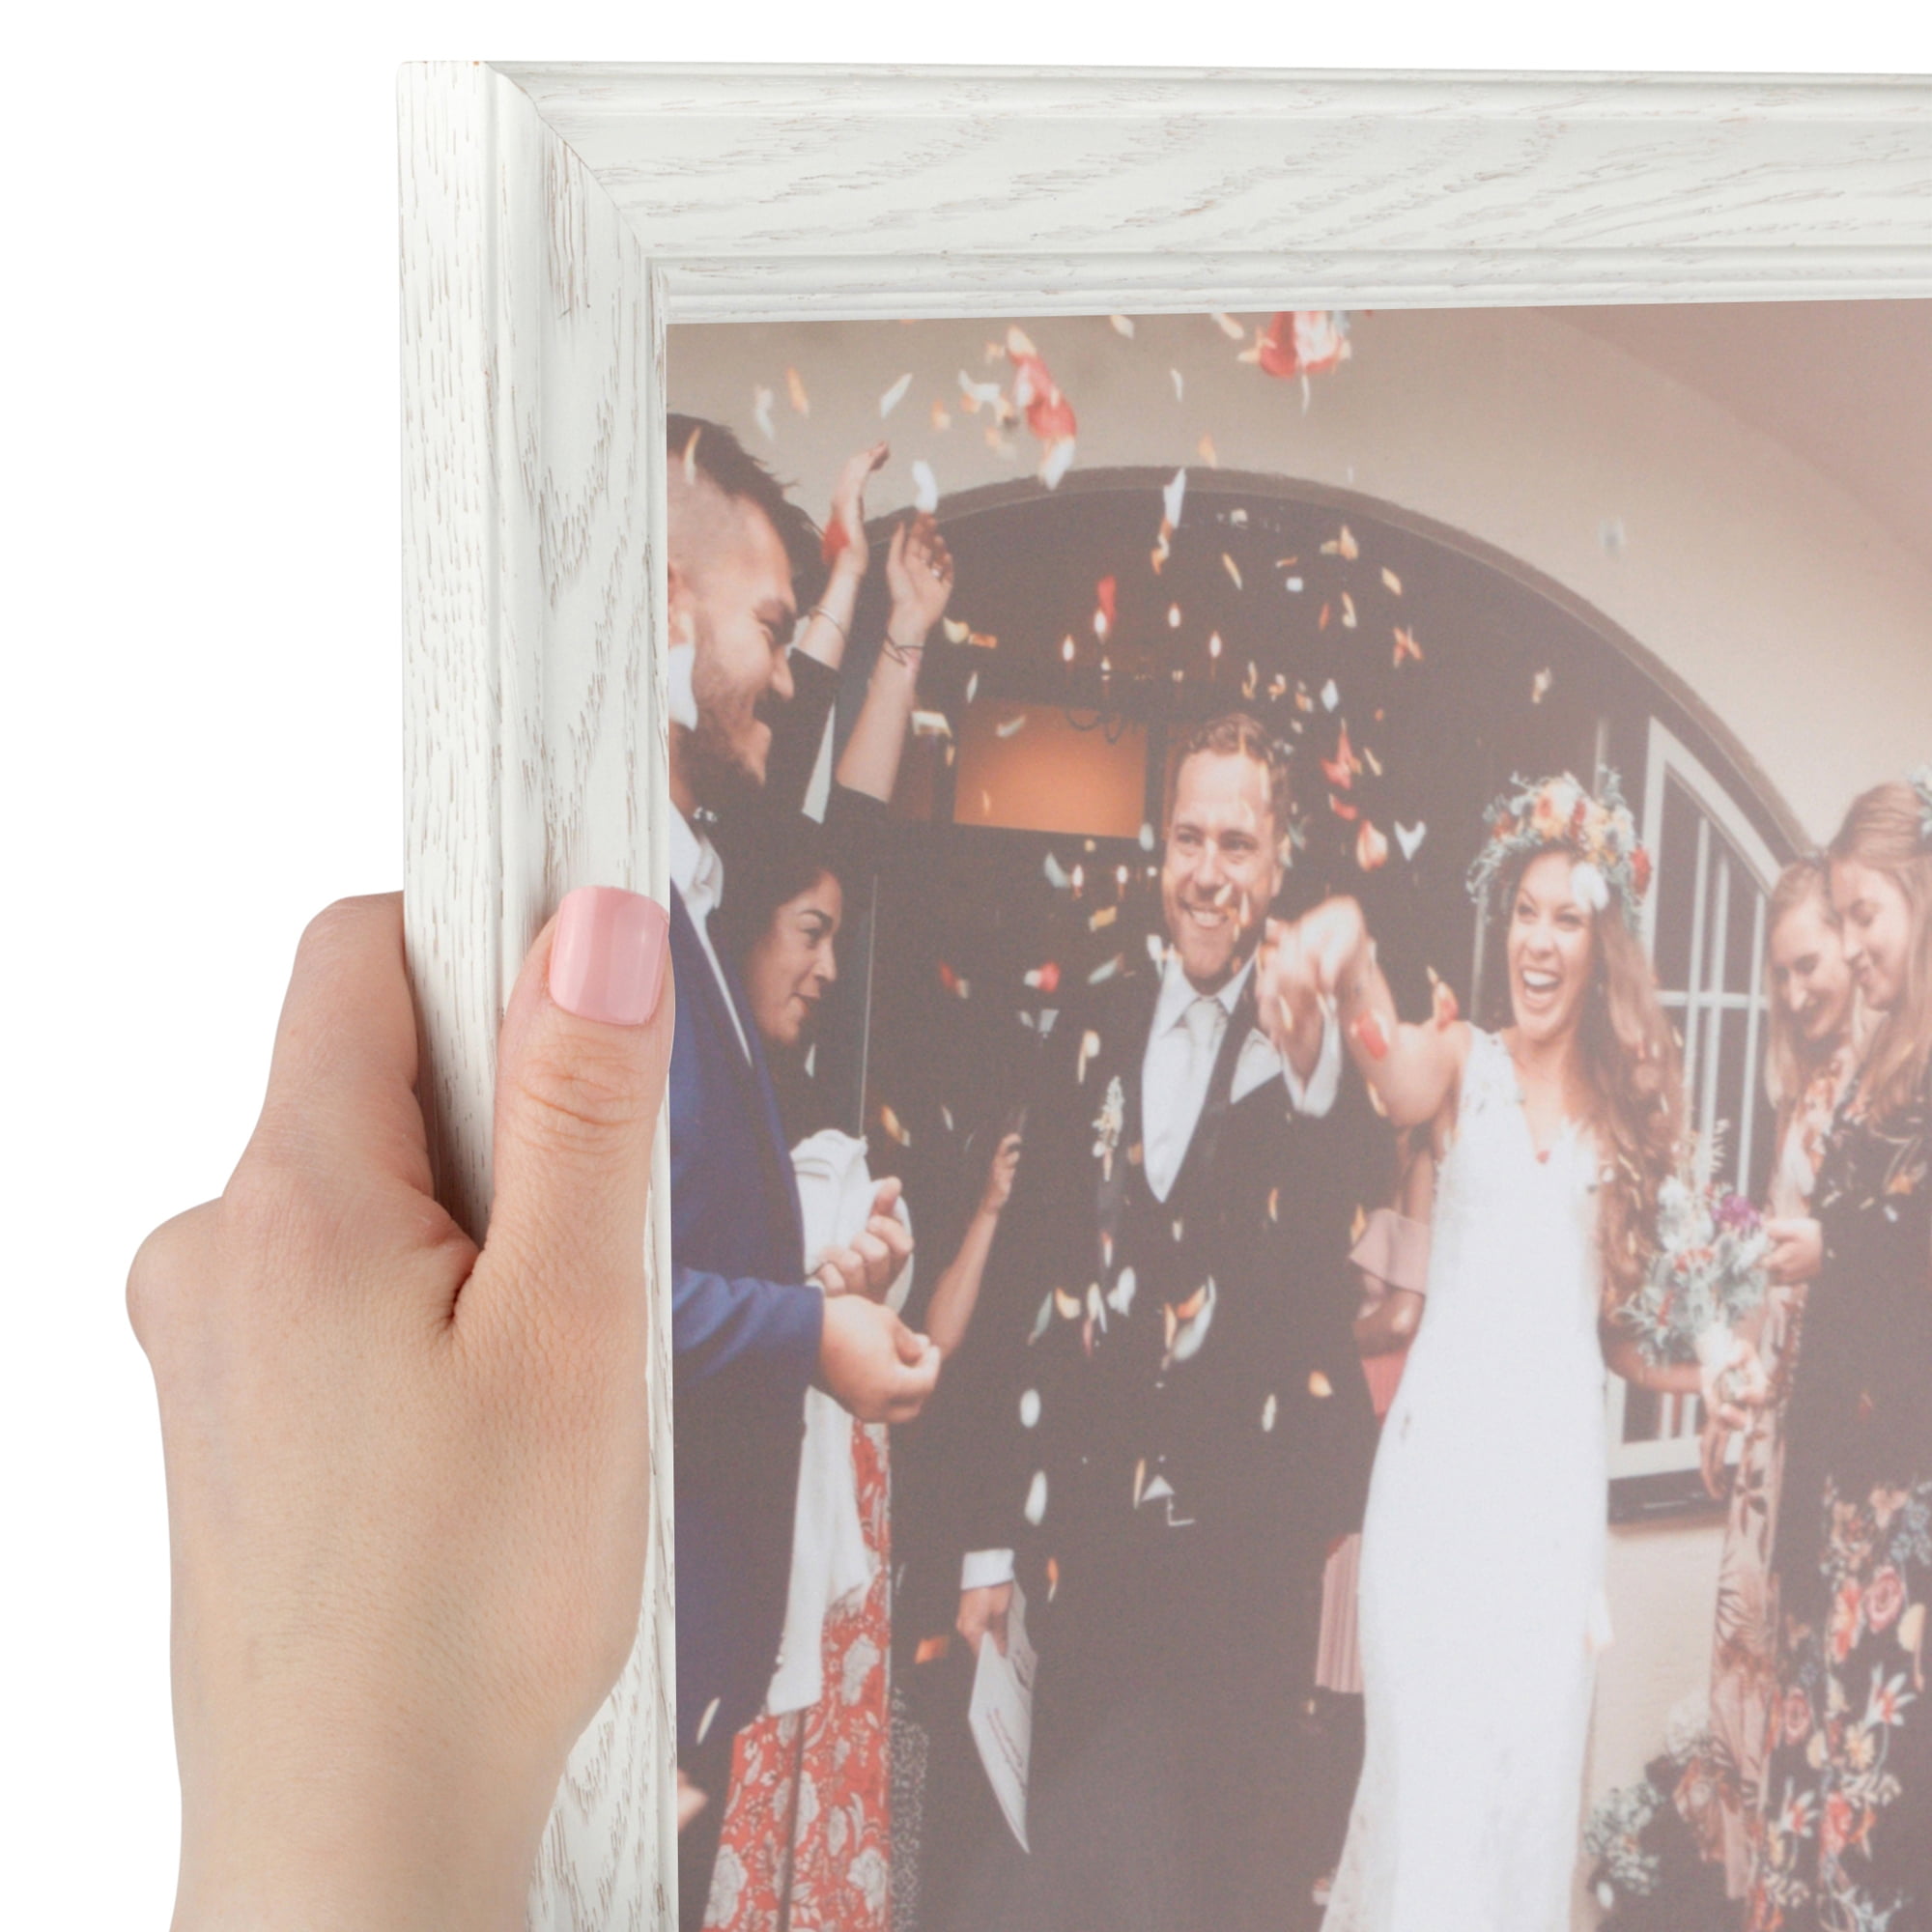 ArtToFrames 16x24 Inch Picture Frame, This 1.25 Inch Custom Wood